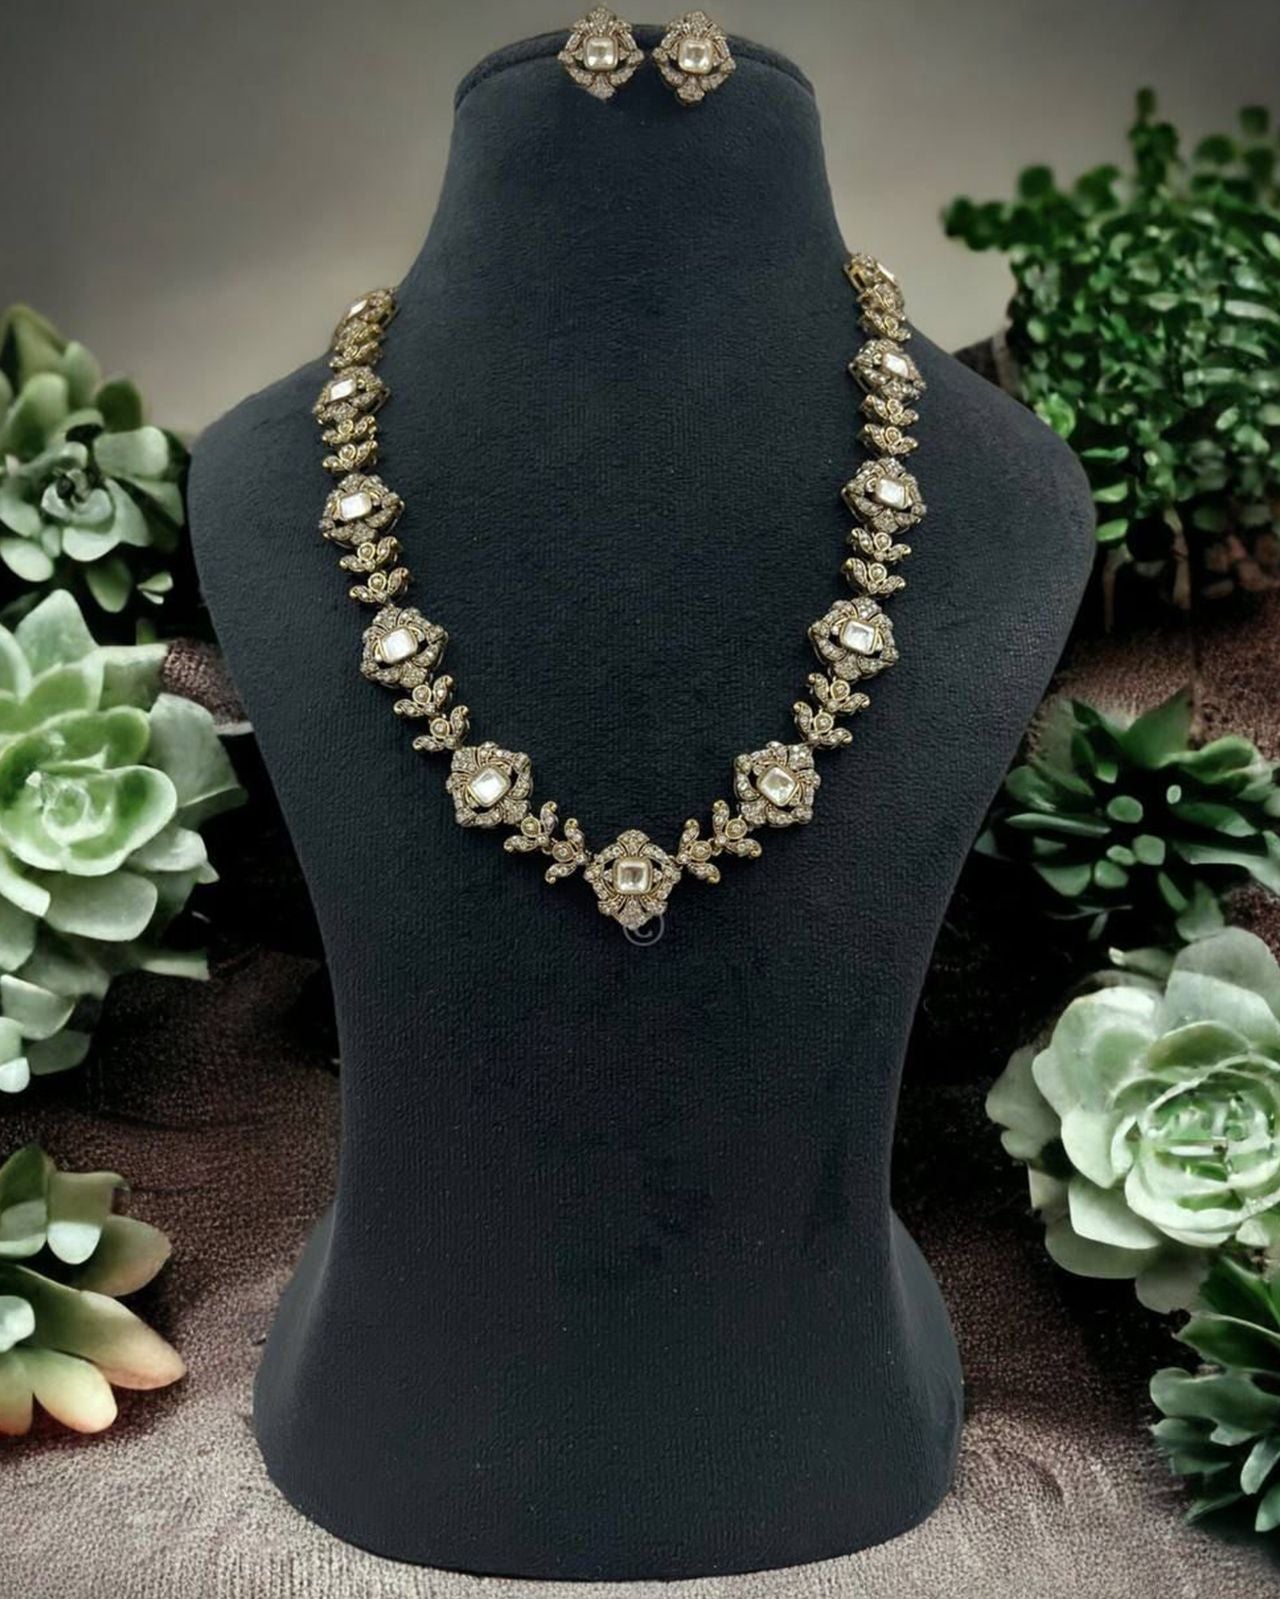 Ethereal Treasures Necklace Set